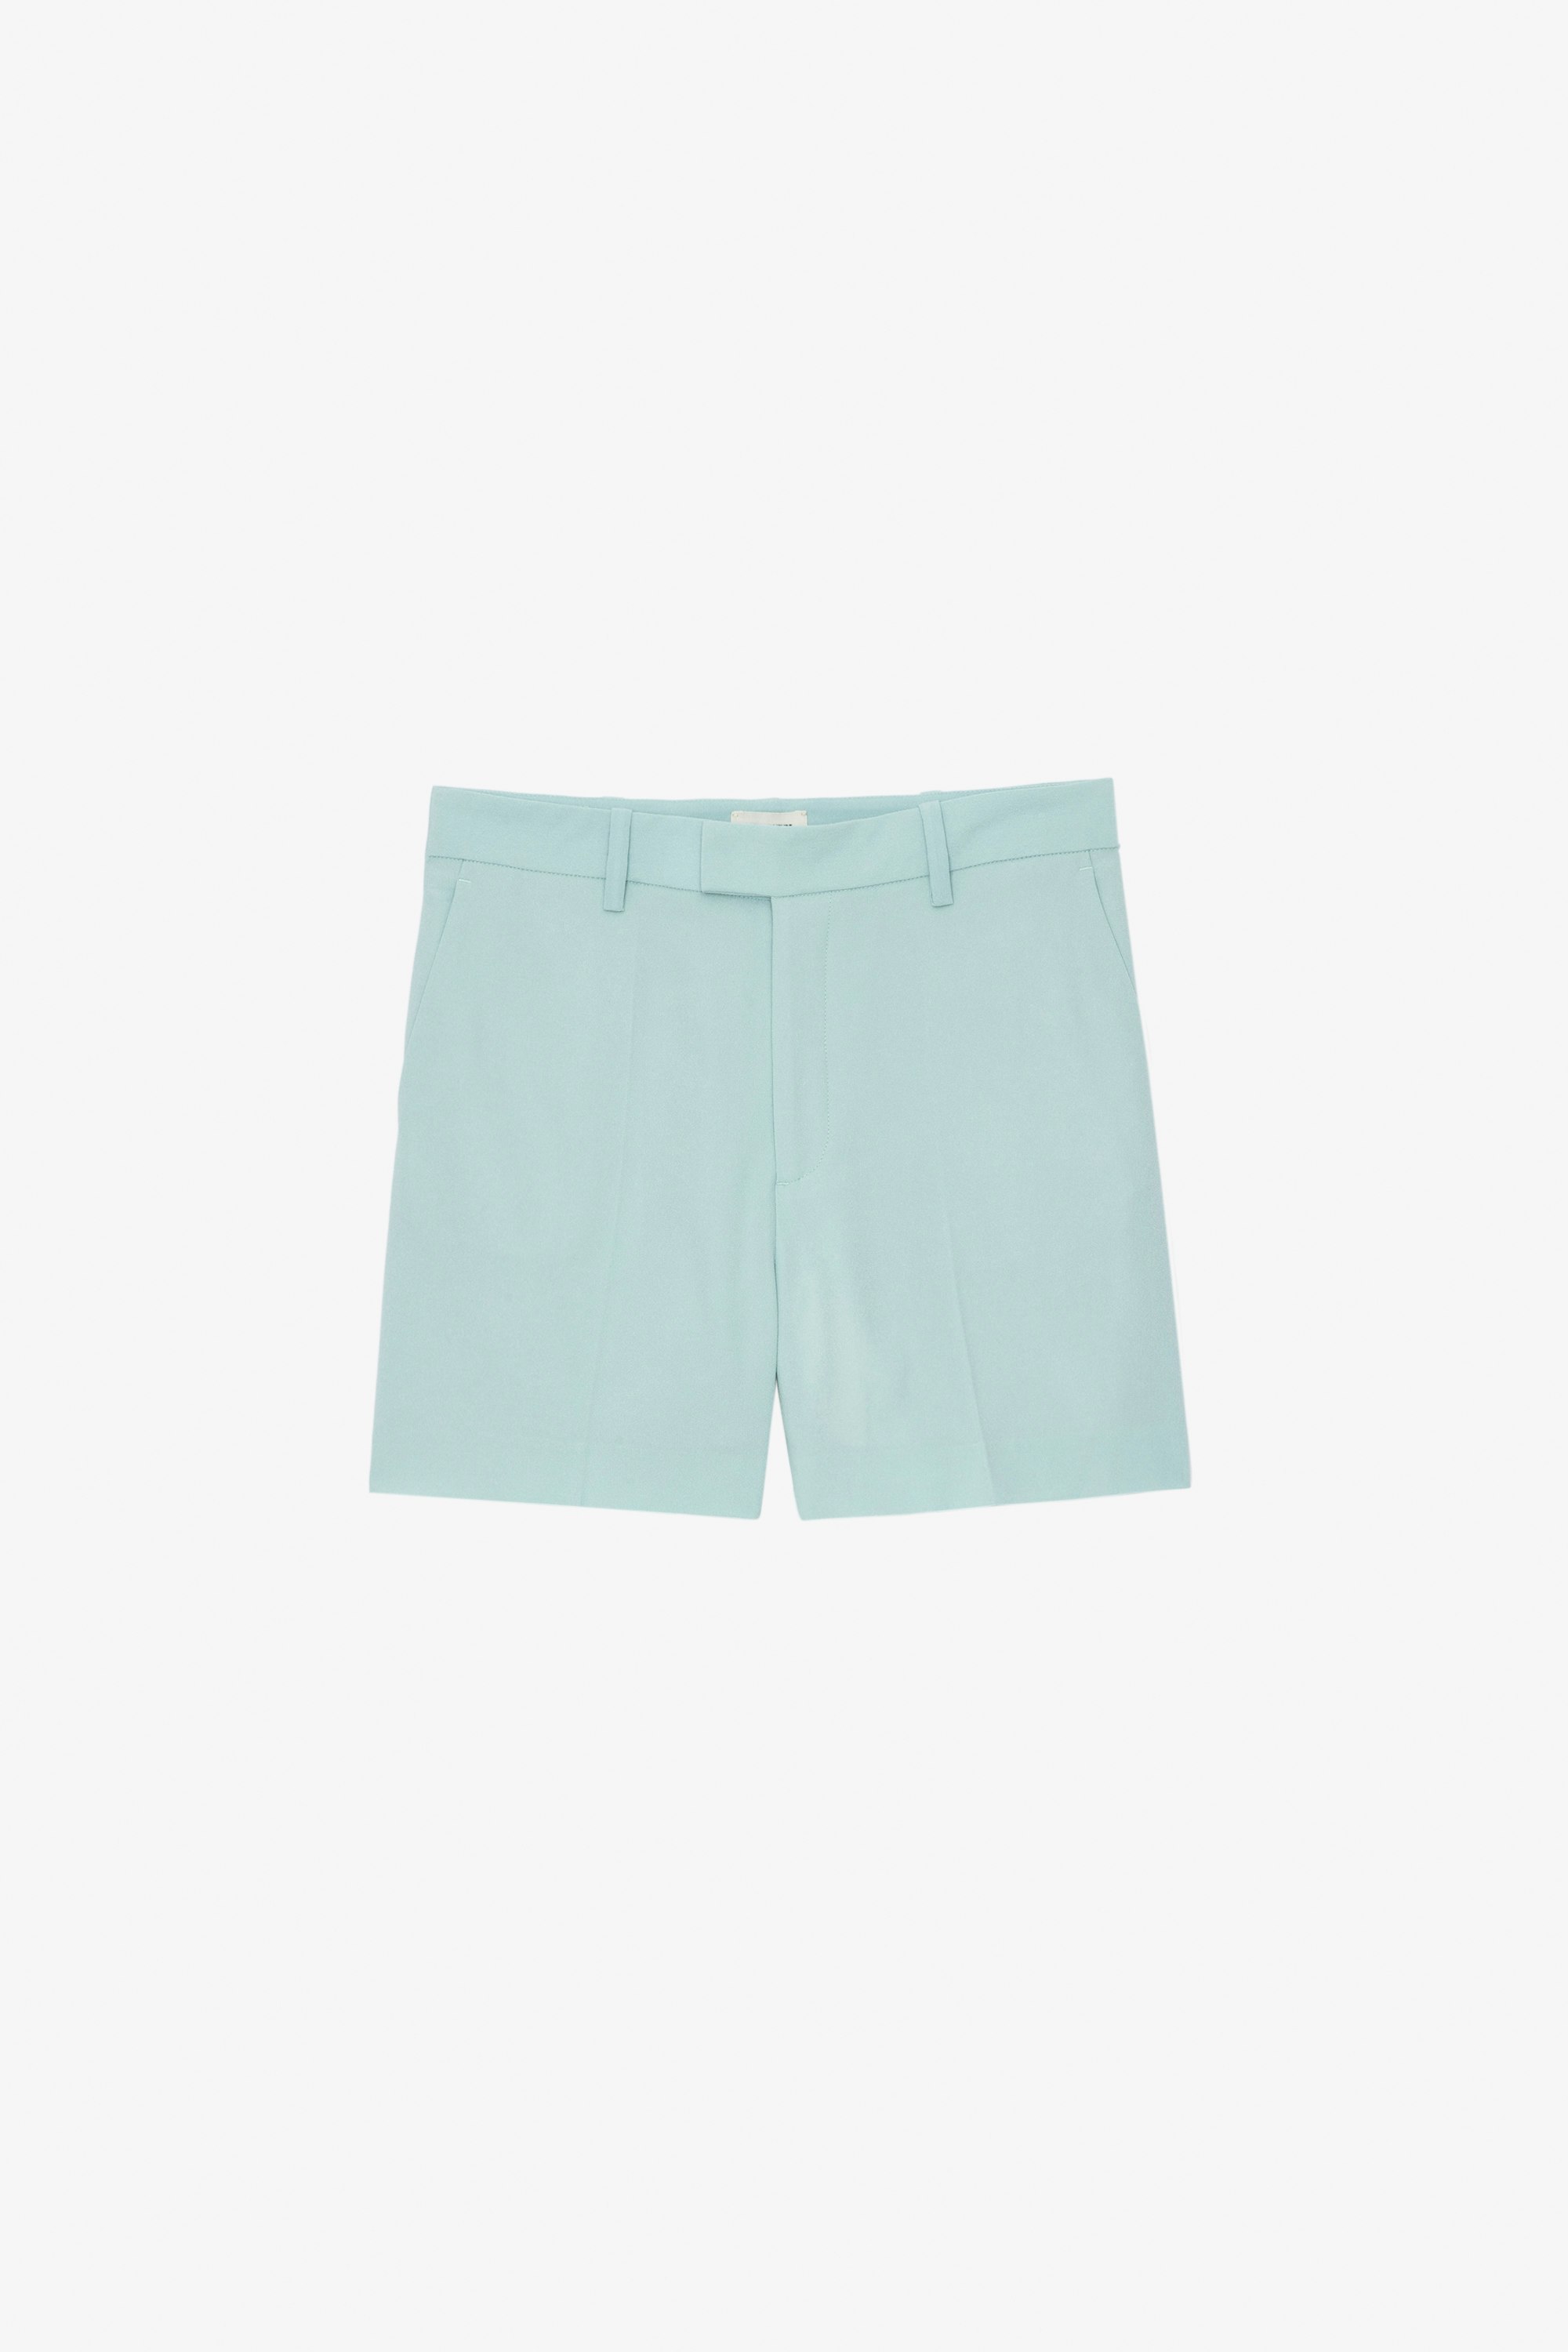 Please Shorts Women's sky blue crepe shorts with multiple pockets